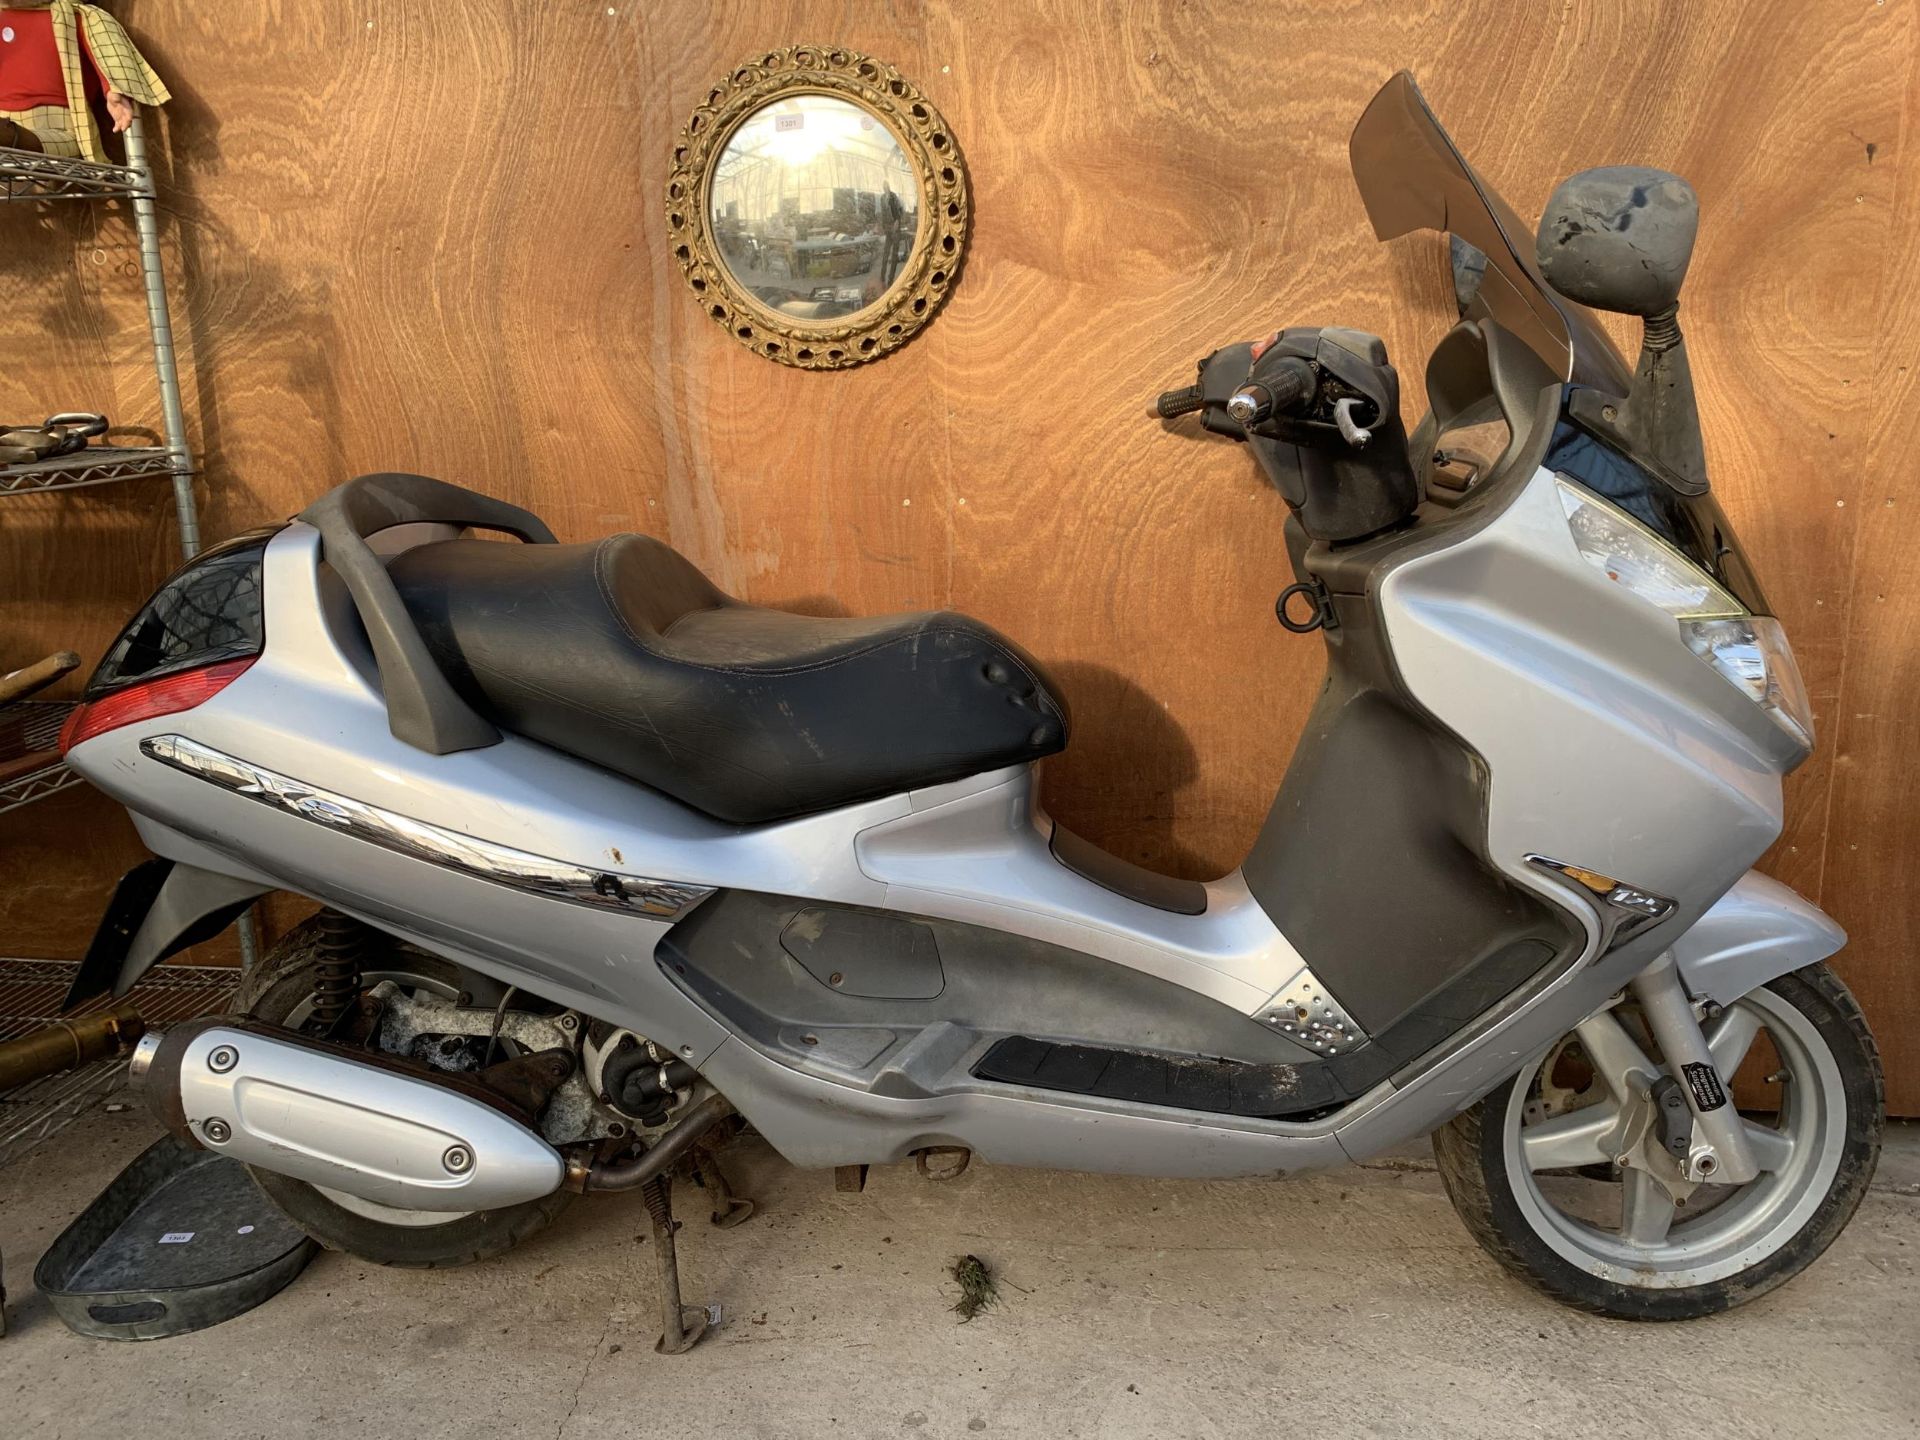 A PIAGGIO SCOOTER SOLD AS SEEN WITH NO PAPERWORK OR KEY AND DAMAGE TO THE LEFT HAND SIDE